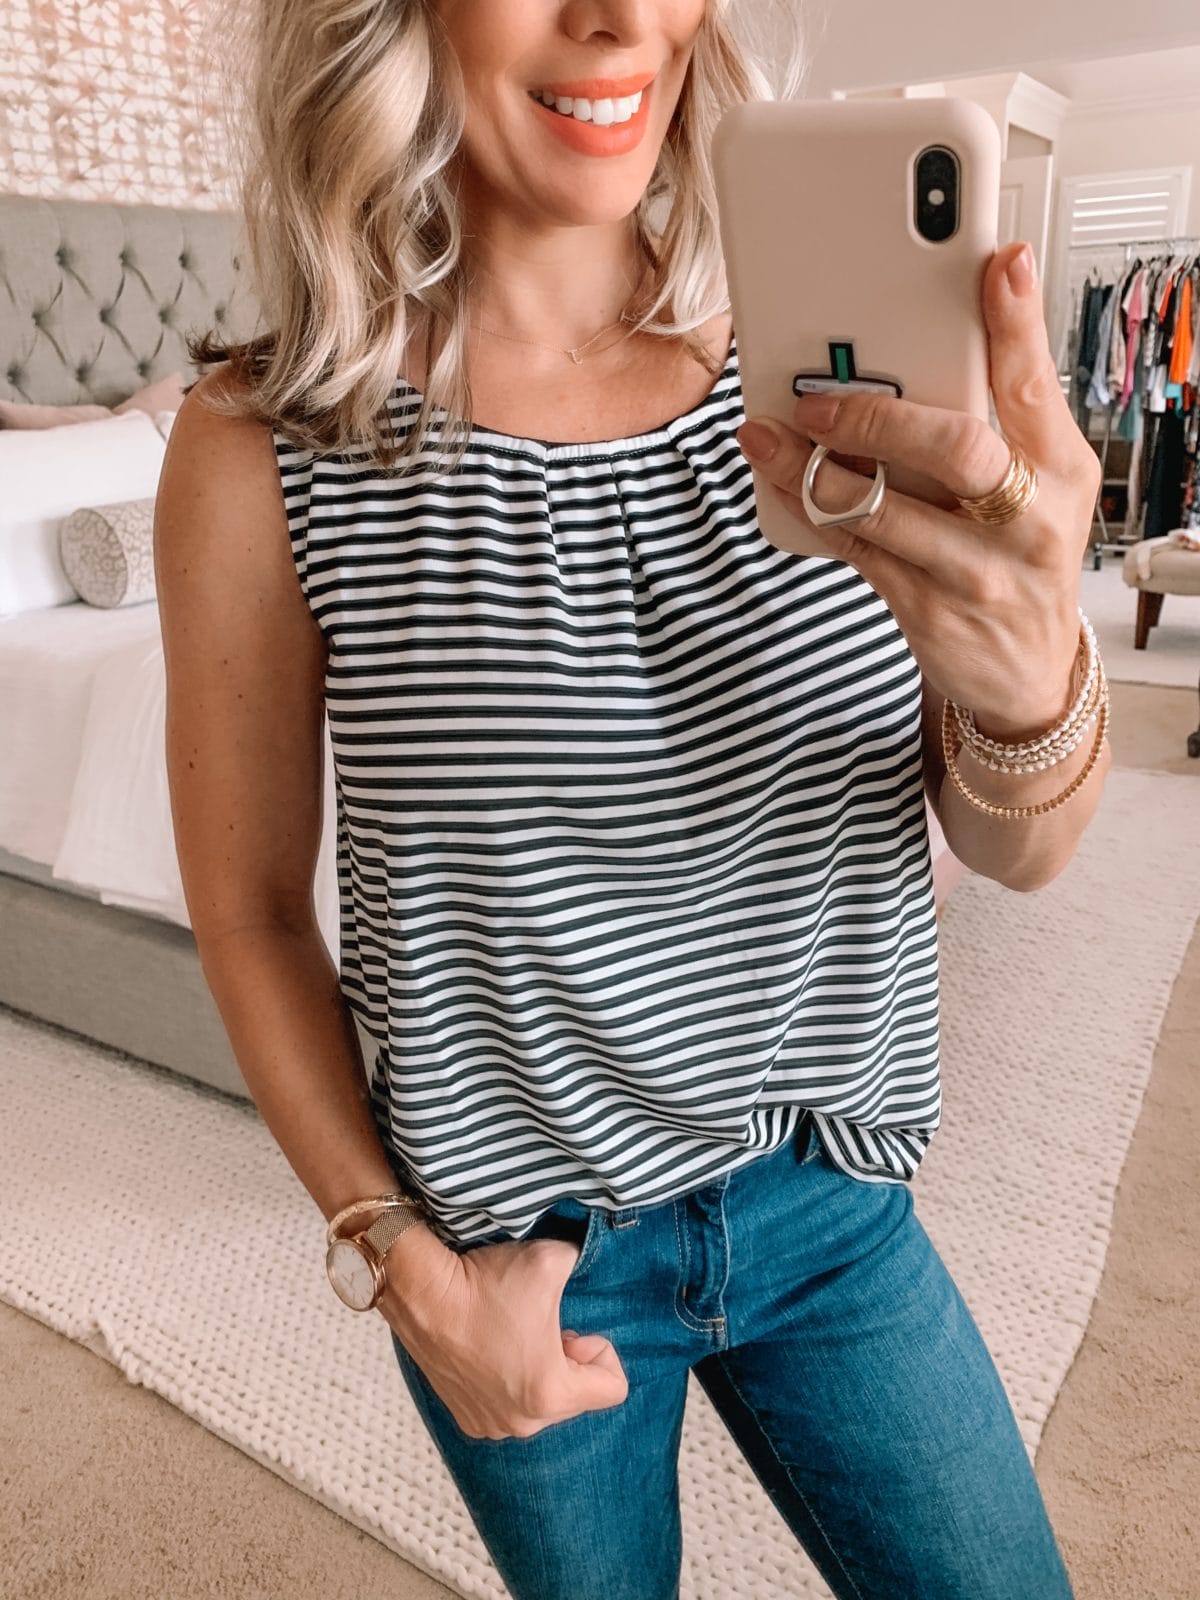 Amazon Fashion Finds, Striped Scoop Neck Sleeveless Top, Skinny Jeans 